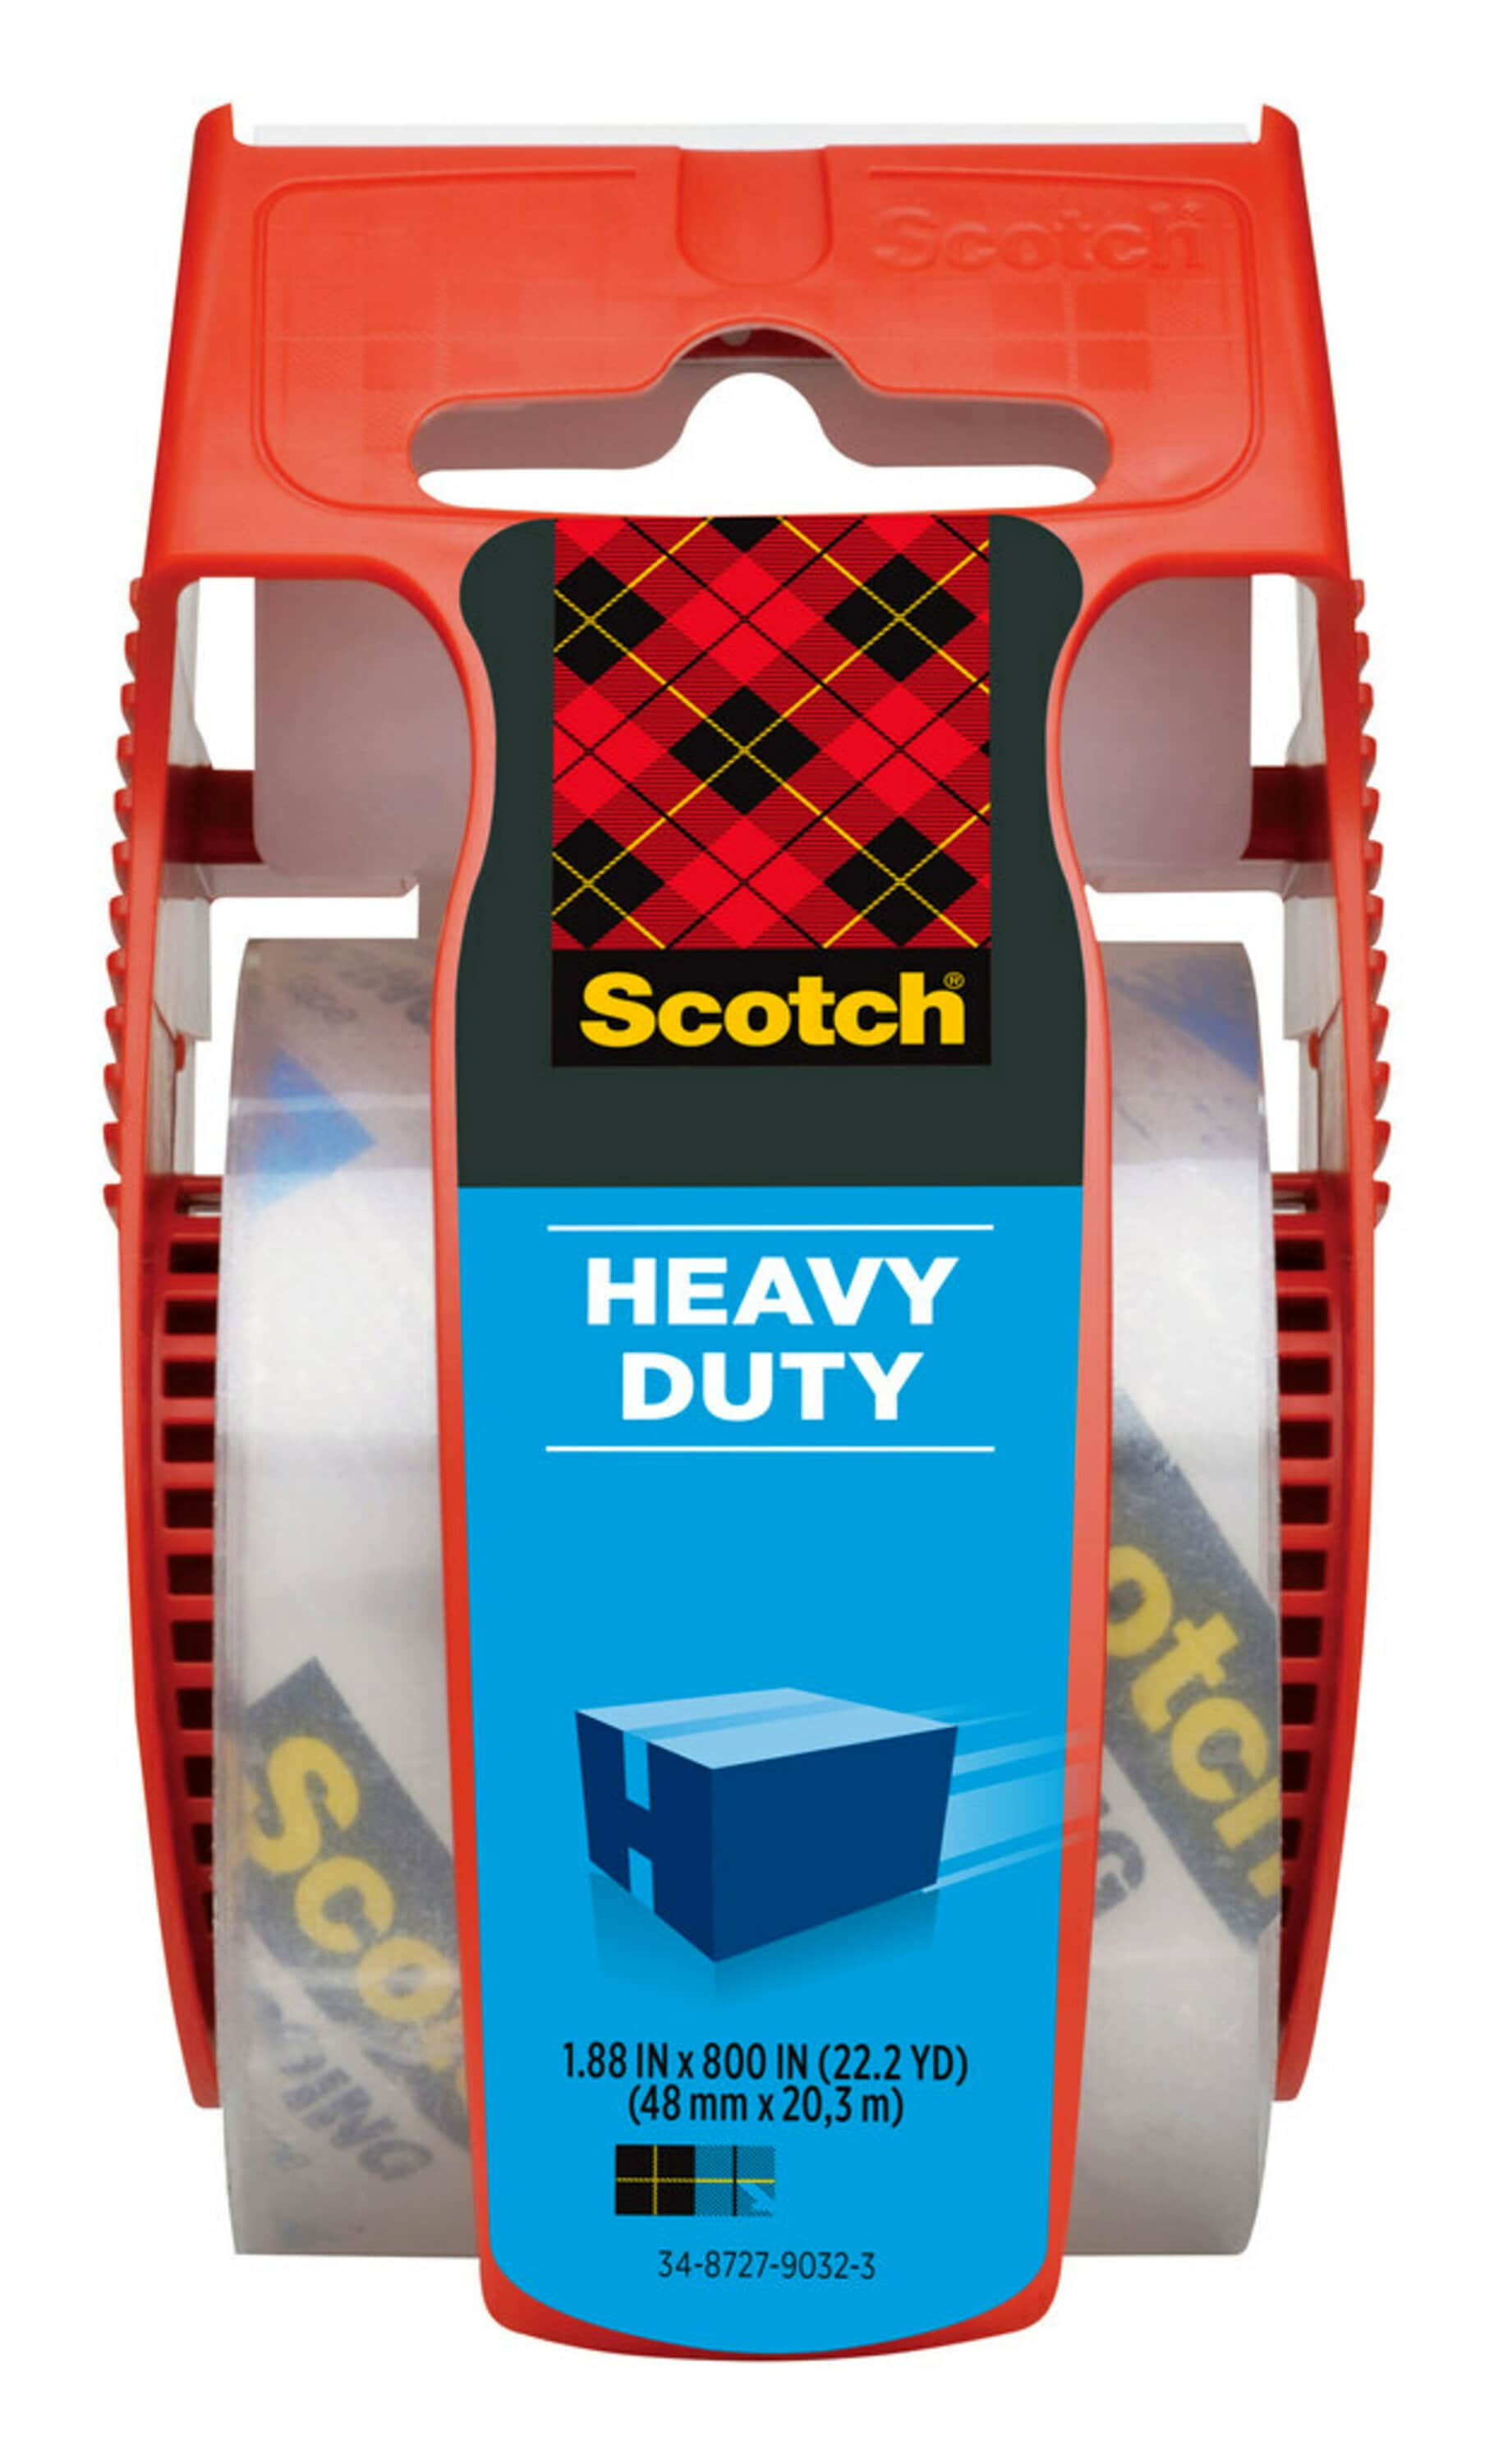 Buy Scotch® Heavy-Duty Packing Tape with Dispenser (Pack of 6) at